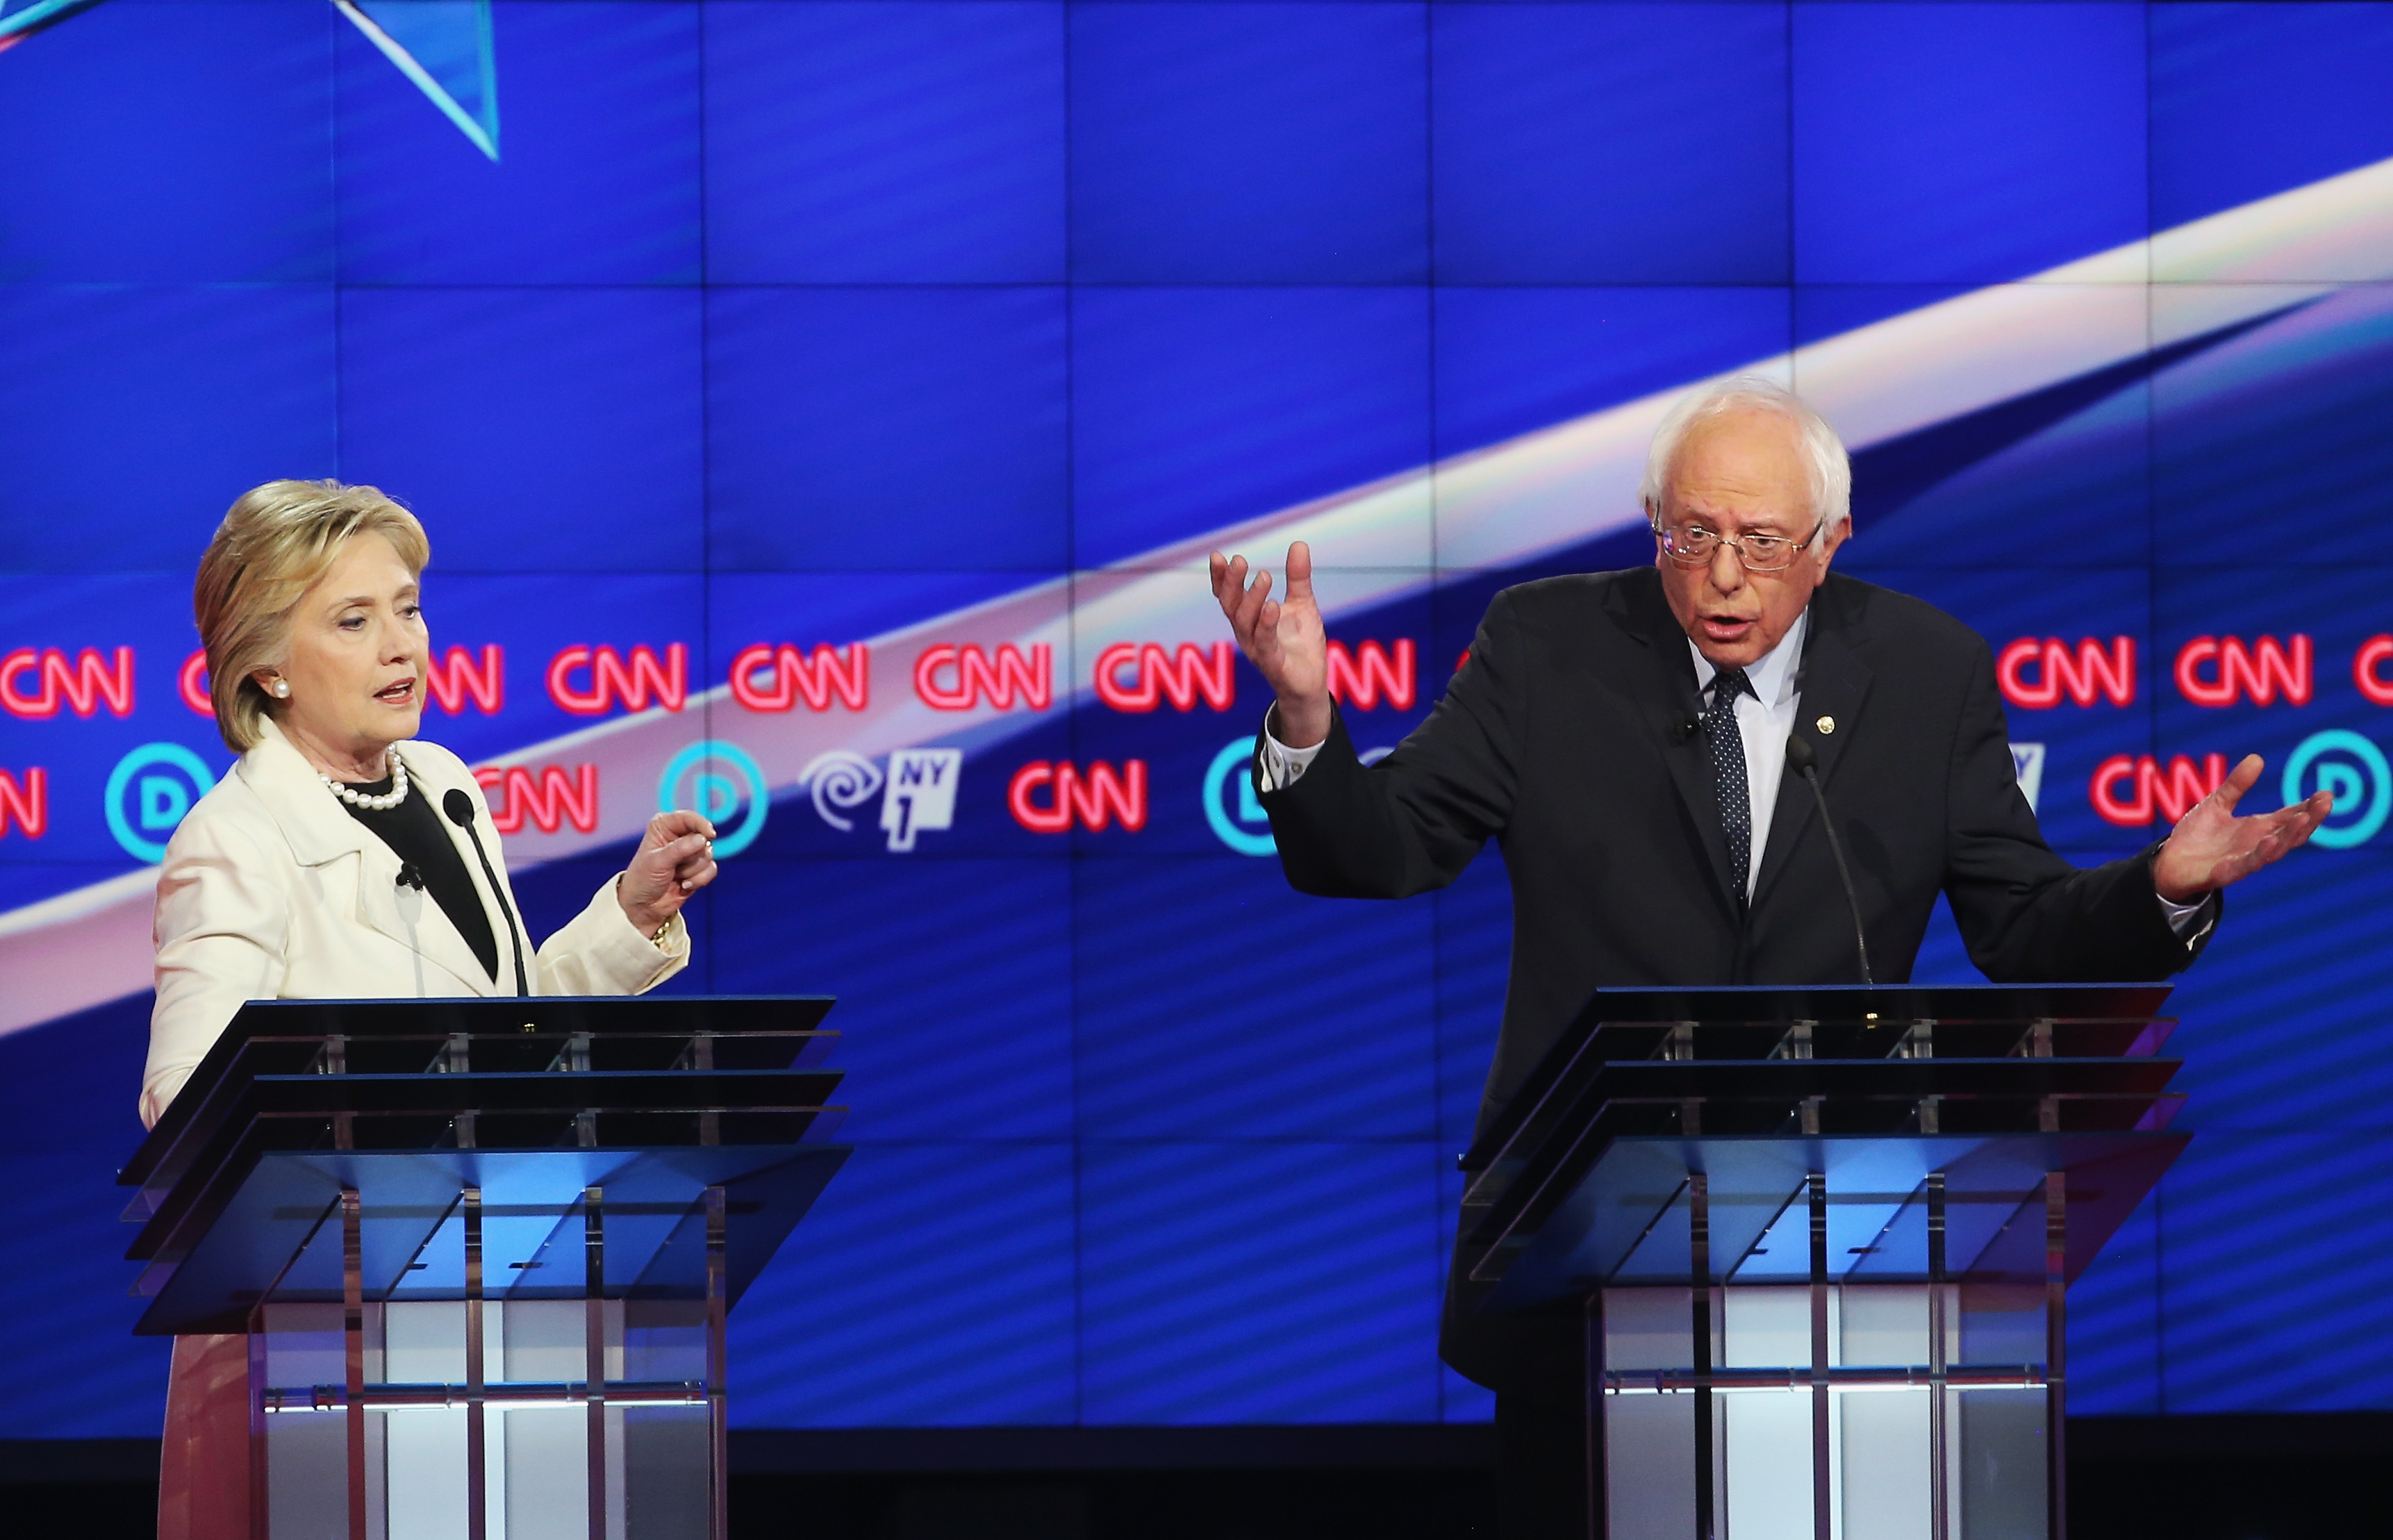 NEW YORK, NY - APRIL 14: Democratic Presidential candidates Hillary Clinton and Sen. Bernie Sanders (D-VT) debate during the CNN Democratic Presidential Primary Debate at the Duggal Greenhouse in the Brooklyn Navy Yard on April 14, 2016 in New York City. The candidates are debating ahead of the New York primary to be held April 19. (Photo by Justin Sullivan/Getty Images)